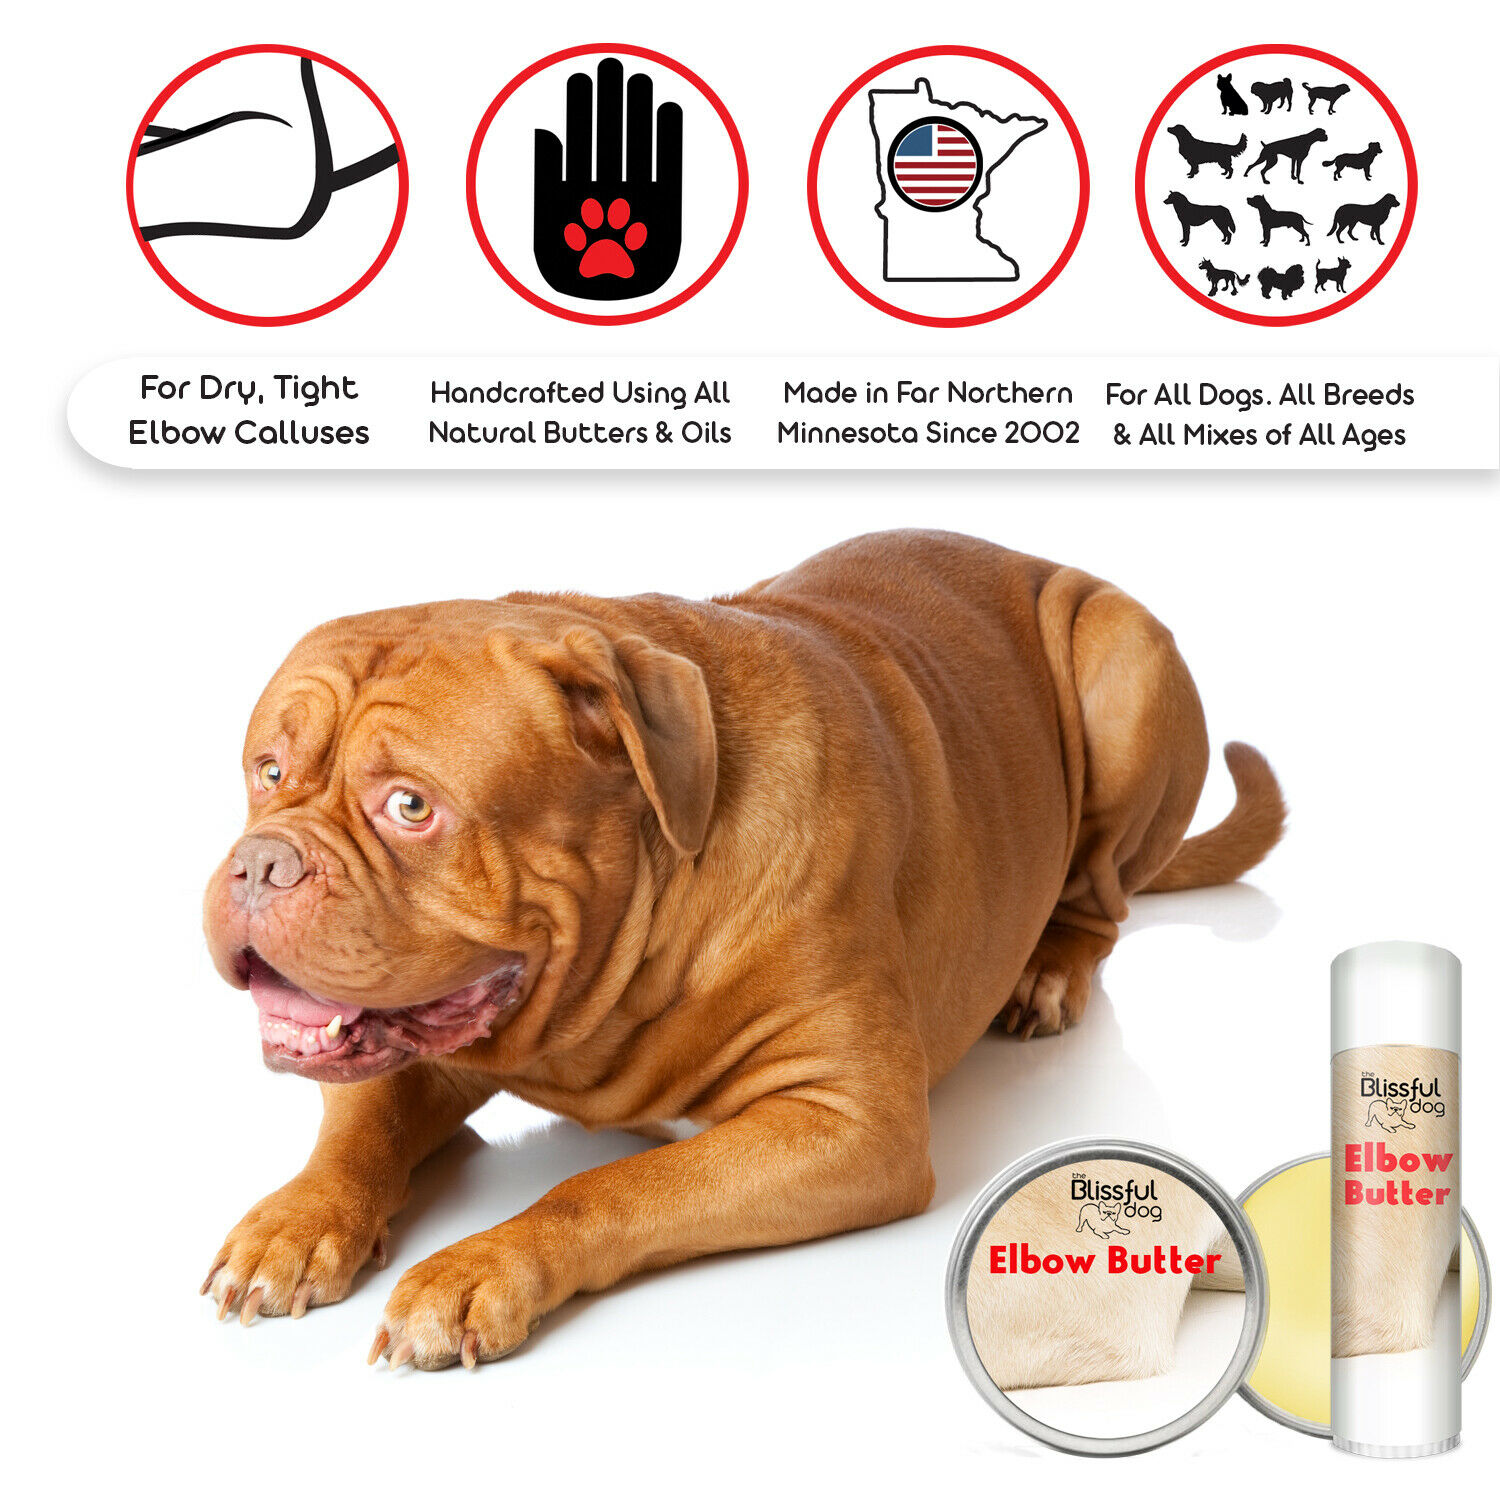 Elbow Butter | Herbal Balm Moisturizes & Conditions Your Dog's Elbow Calluses